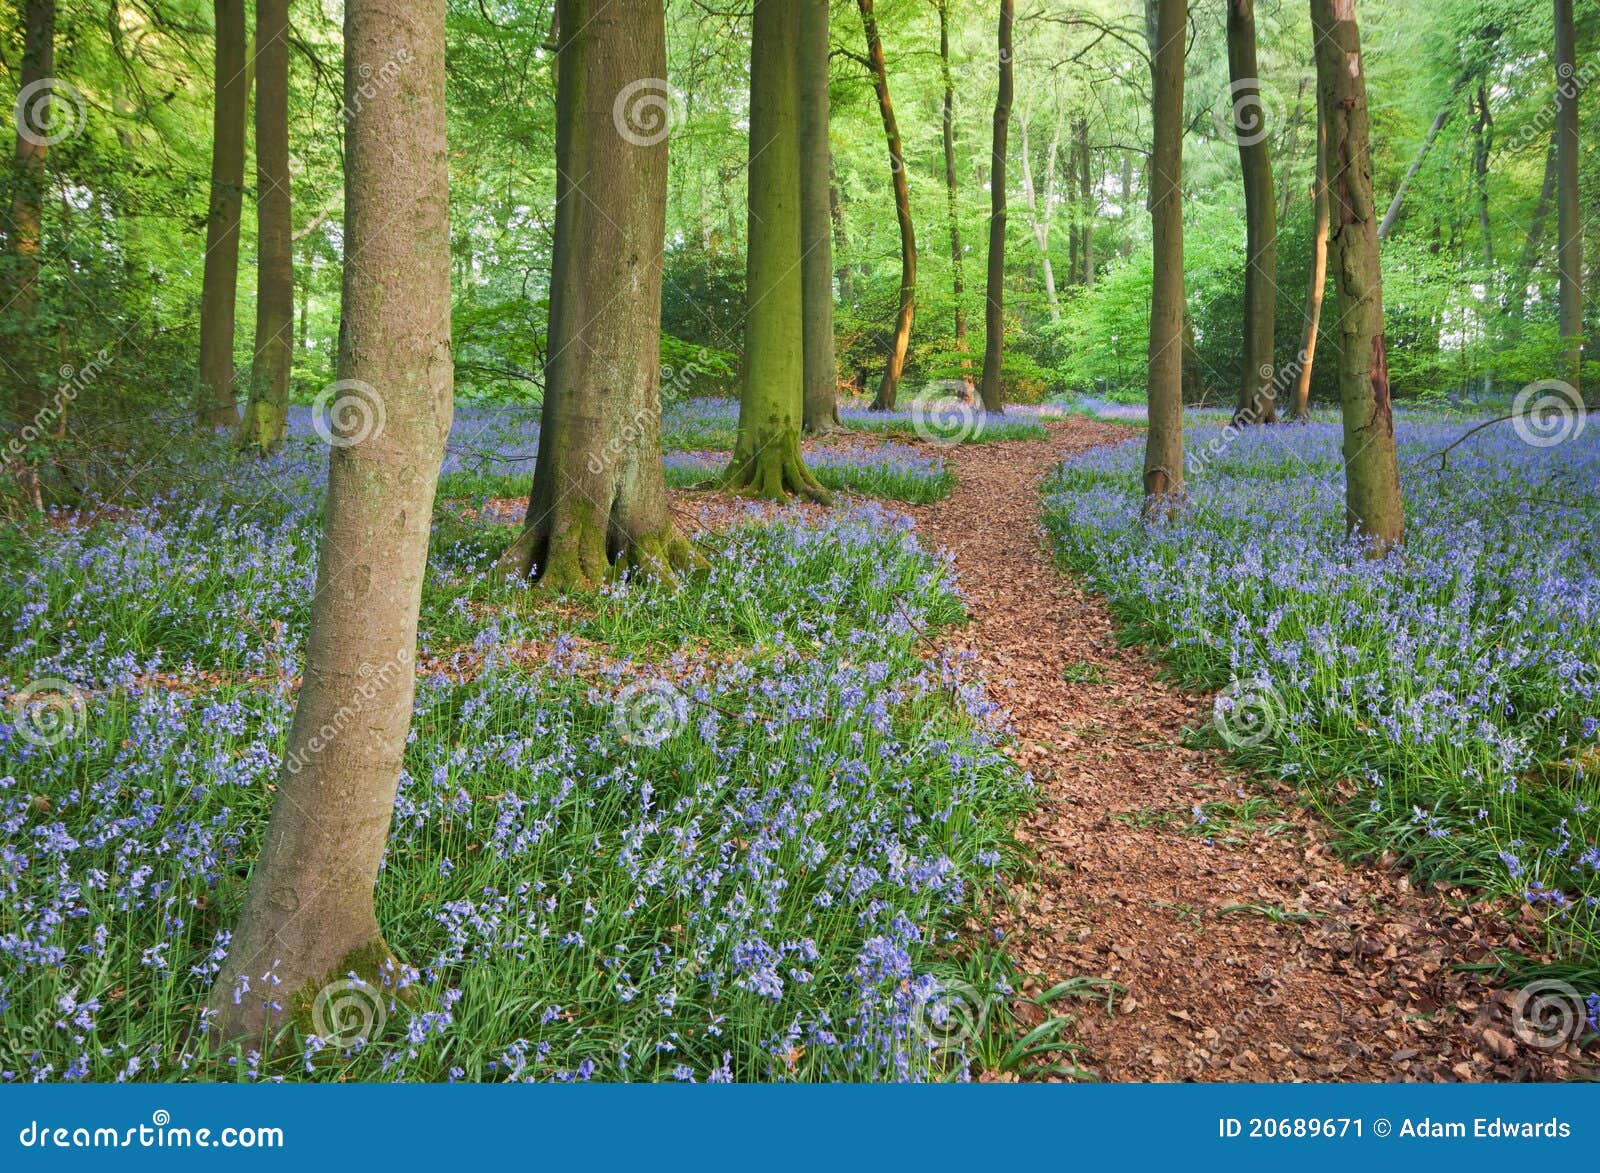 trail through bluebell woods